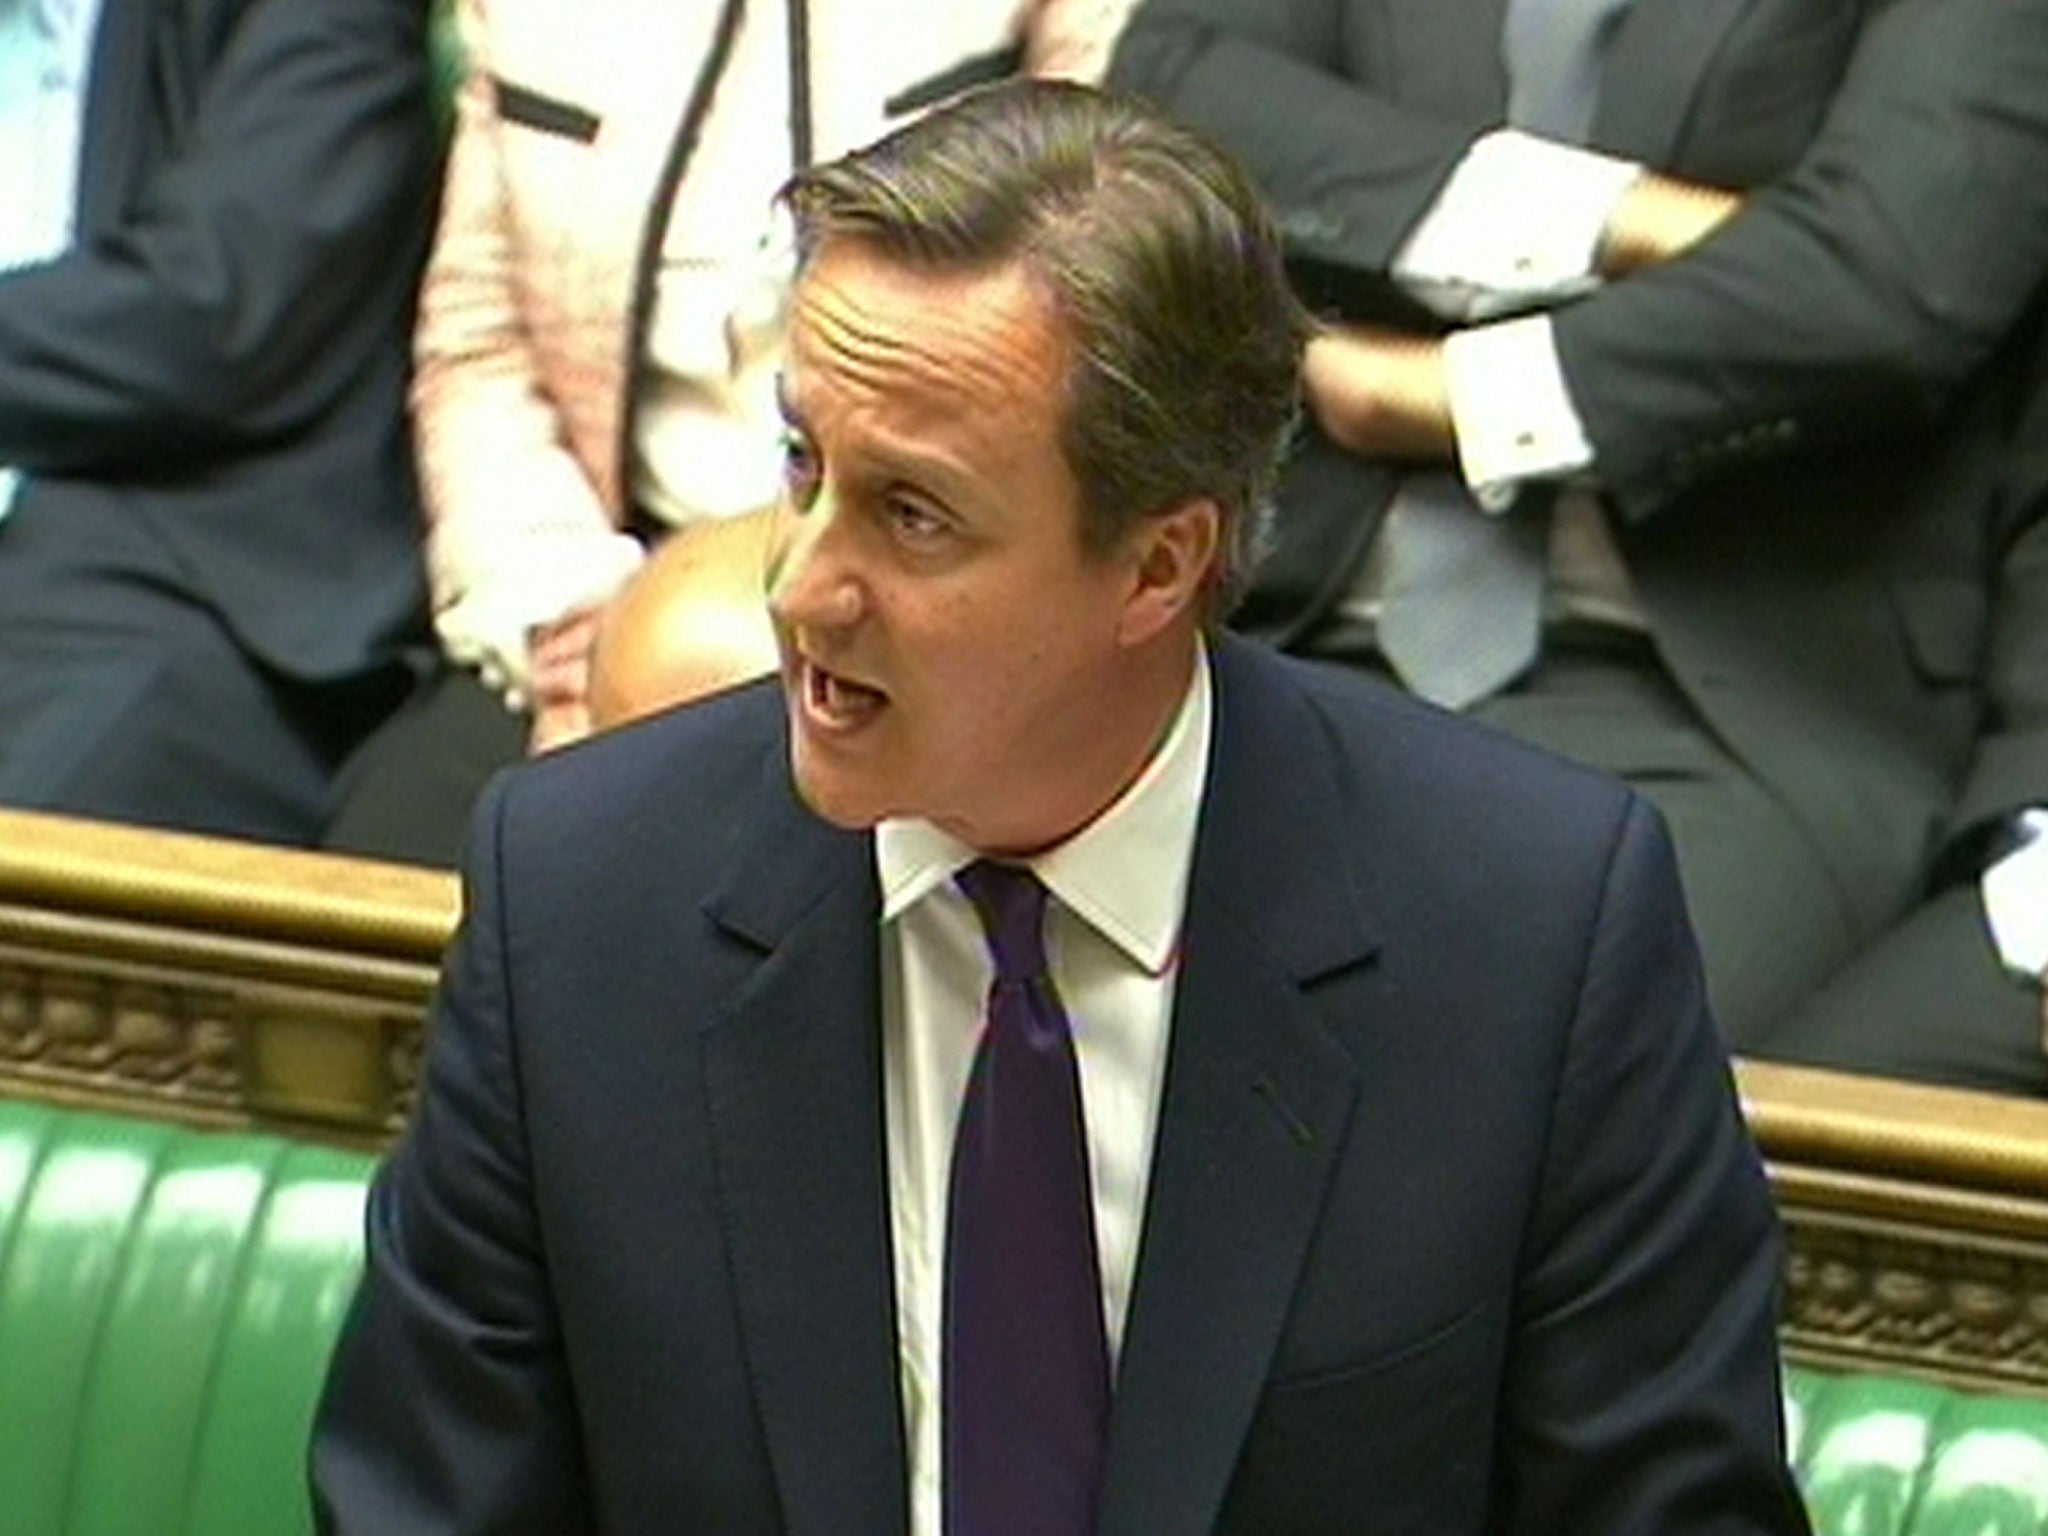 David Cameron speaks to newly elected MPs in the House of Commons for the first time since the general election